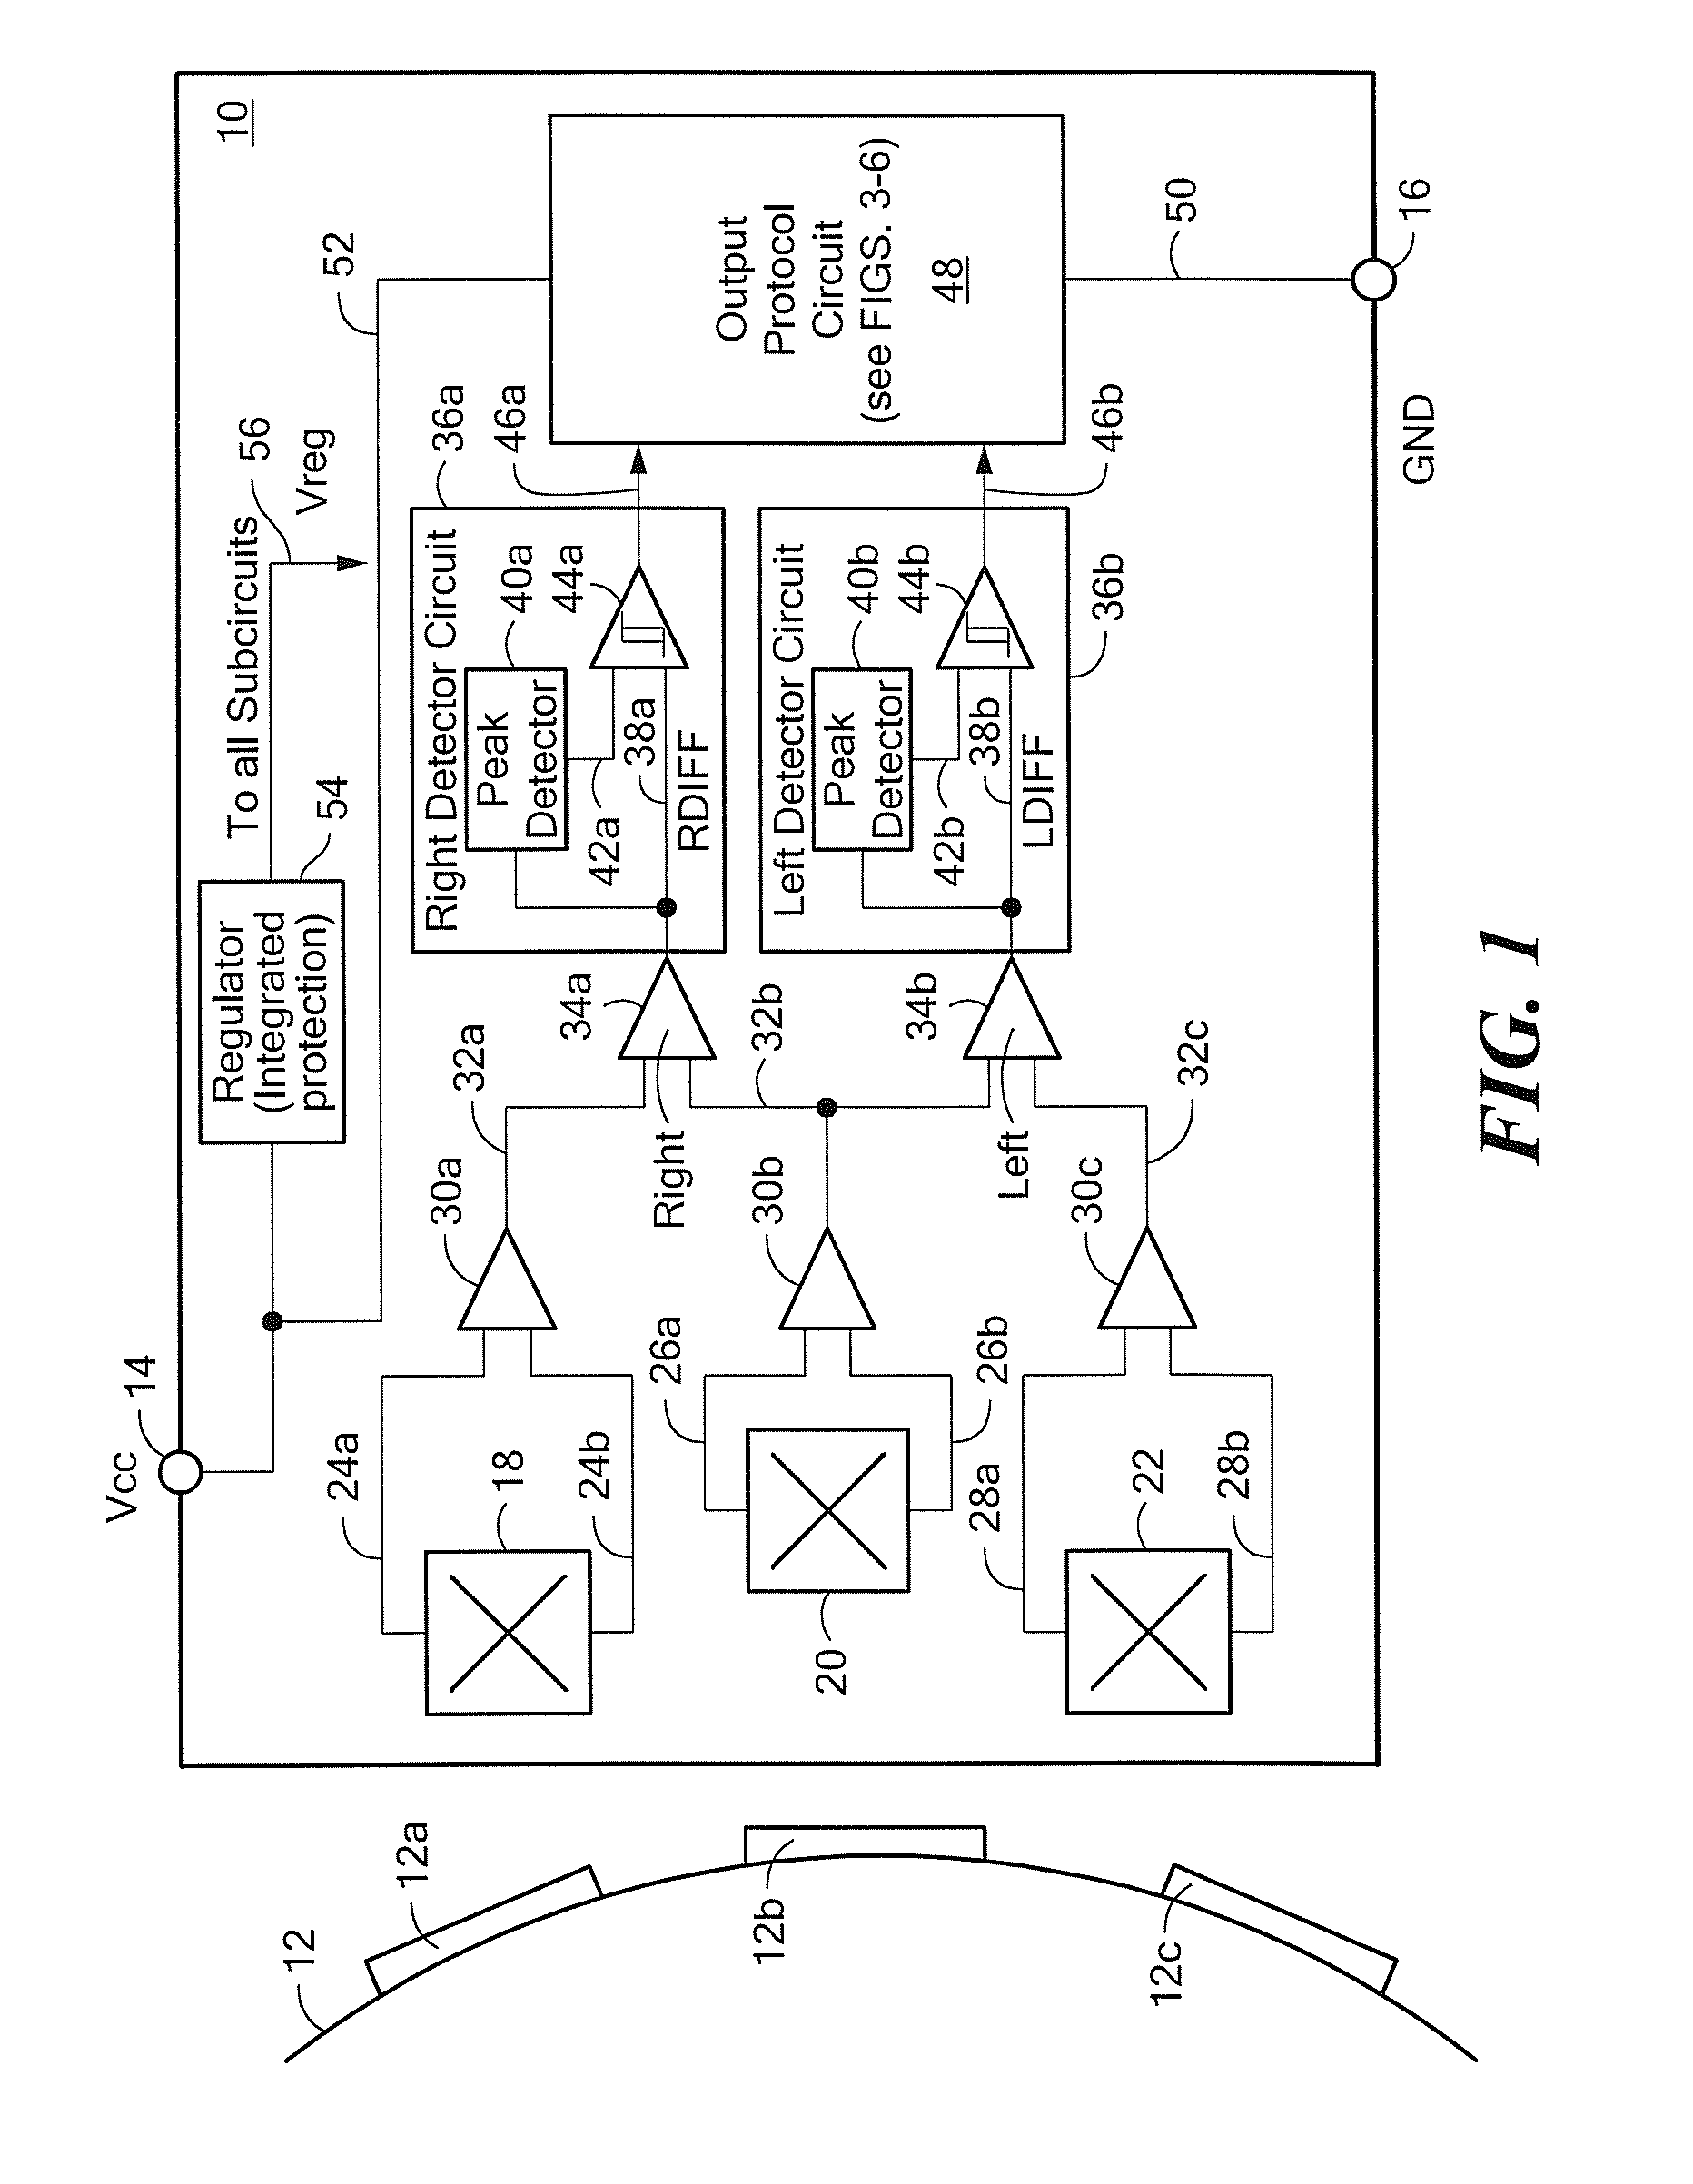 Apparatus and method for providing an output signal indicative of a speed of rotation and a direction of rotation as a ferromagnetic object